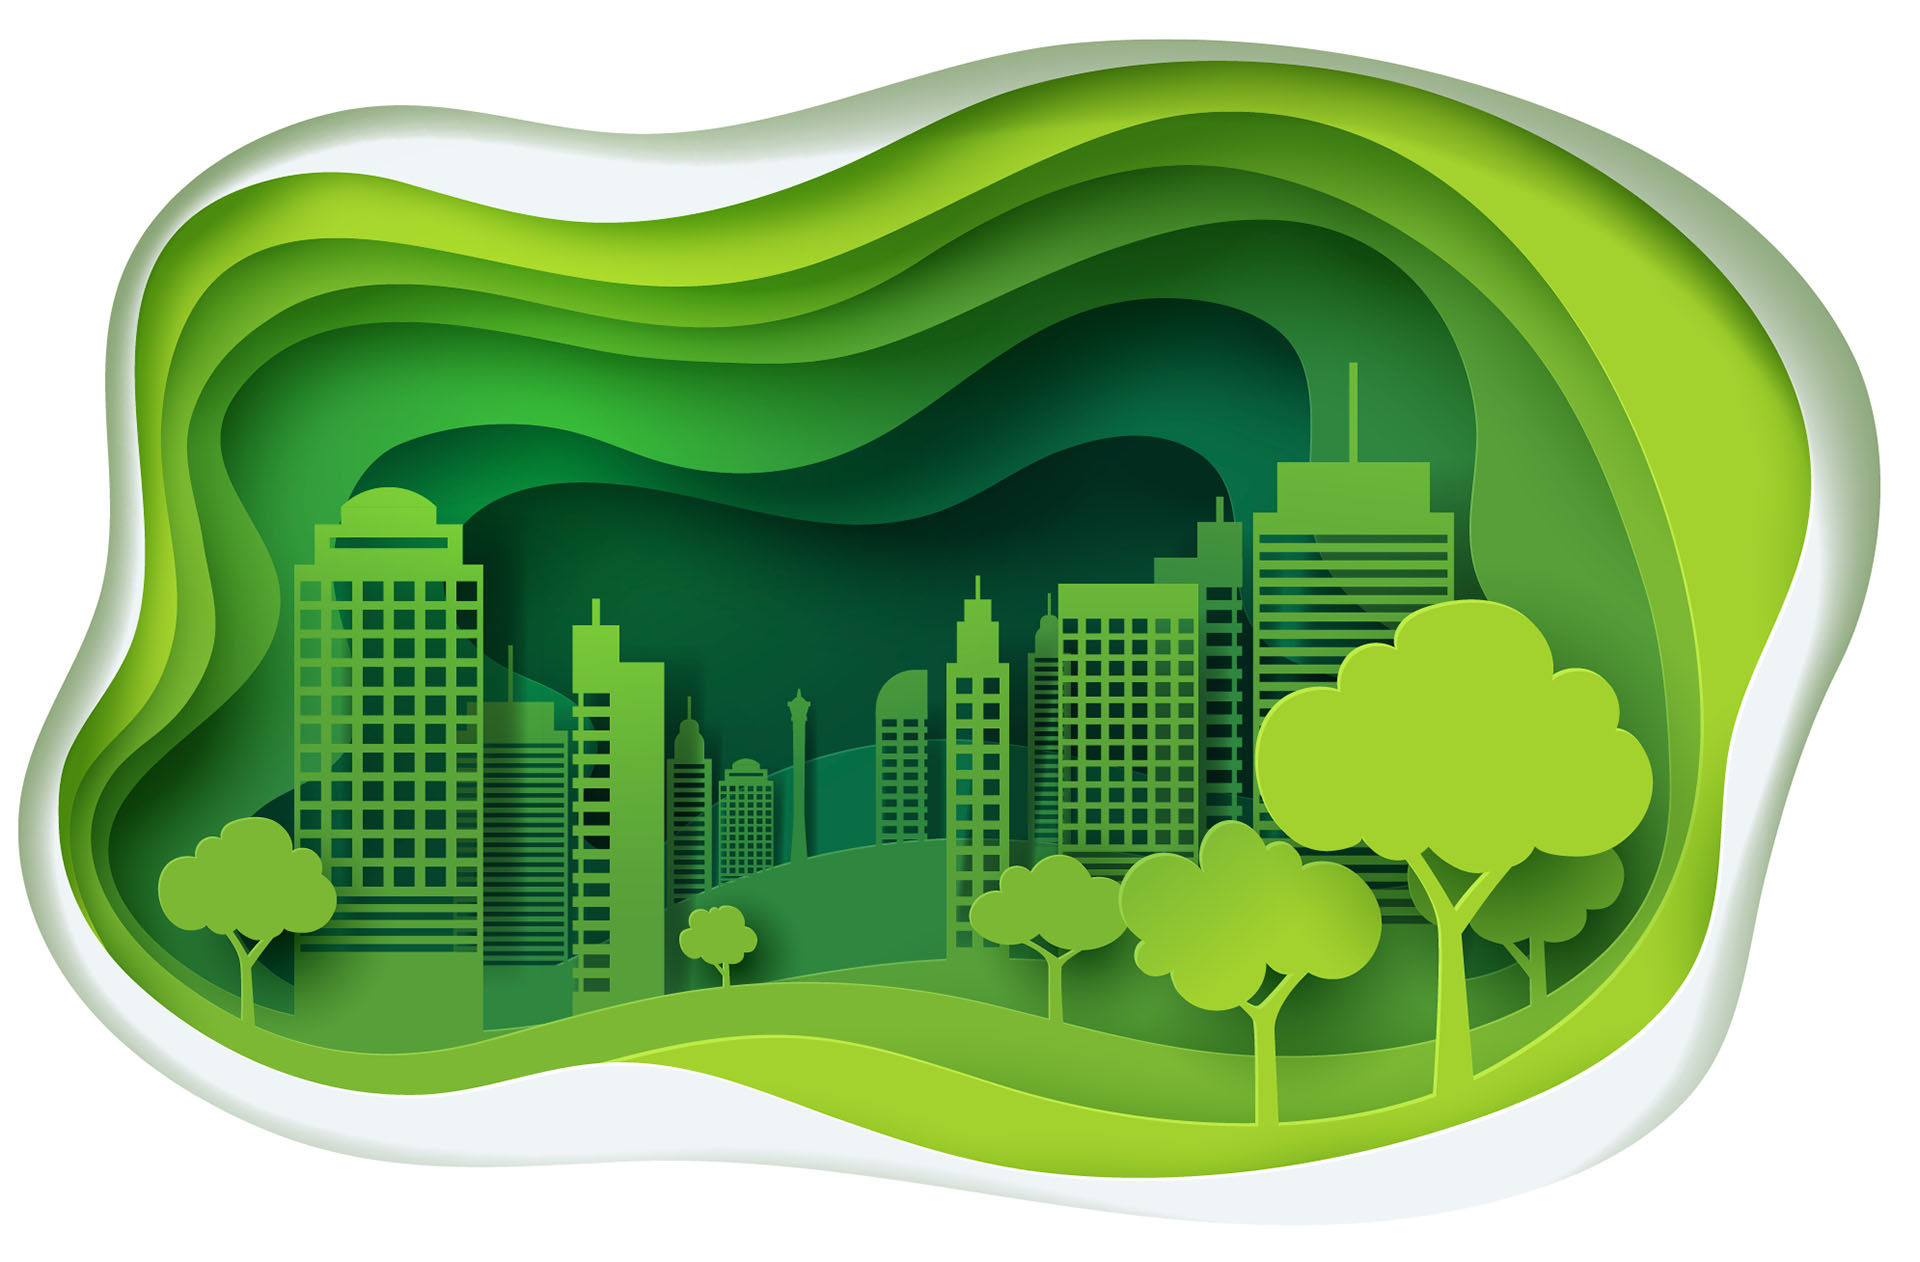 Asymmetrical graphic of a city, tinted green.